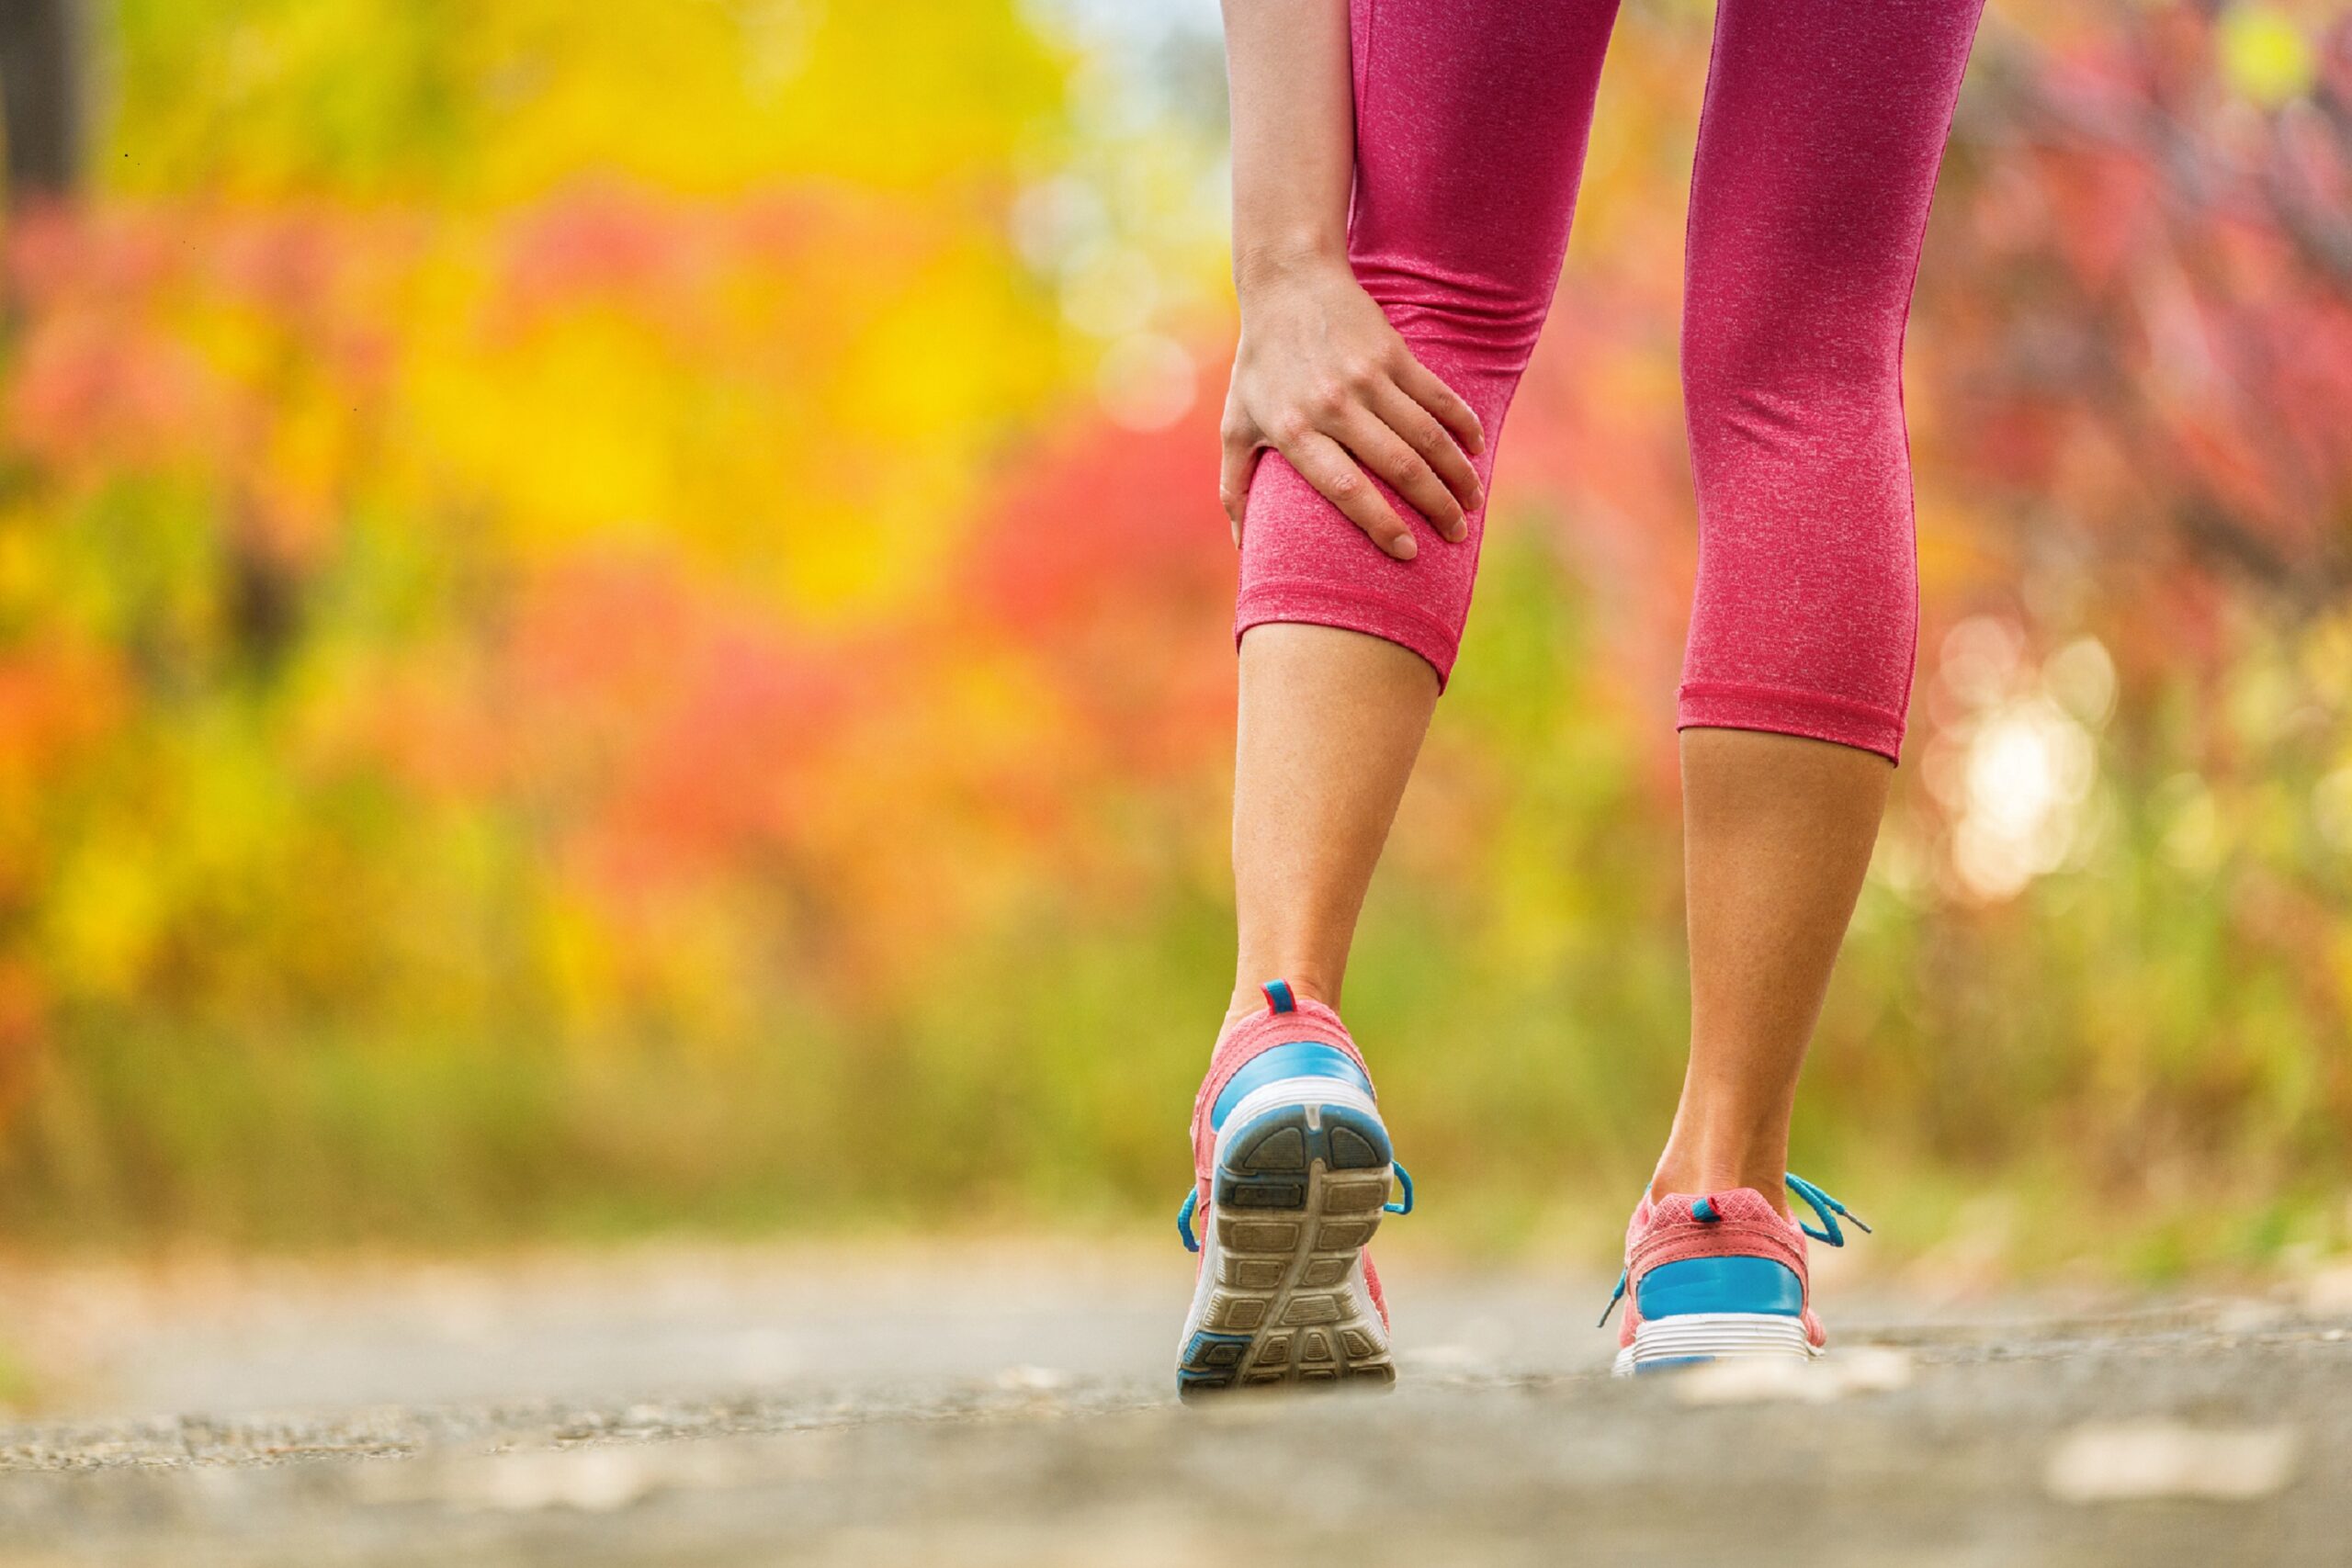 Leg pain when walking can be a sign of serious illness